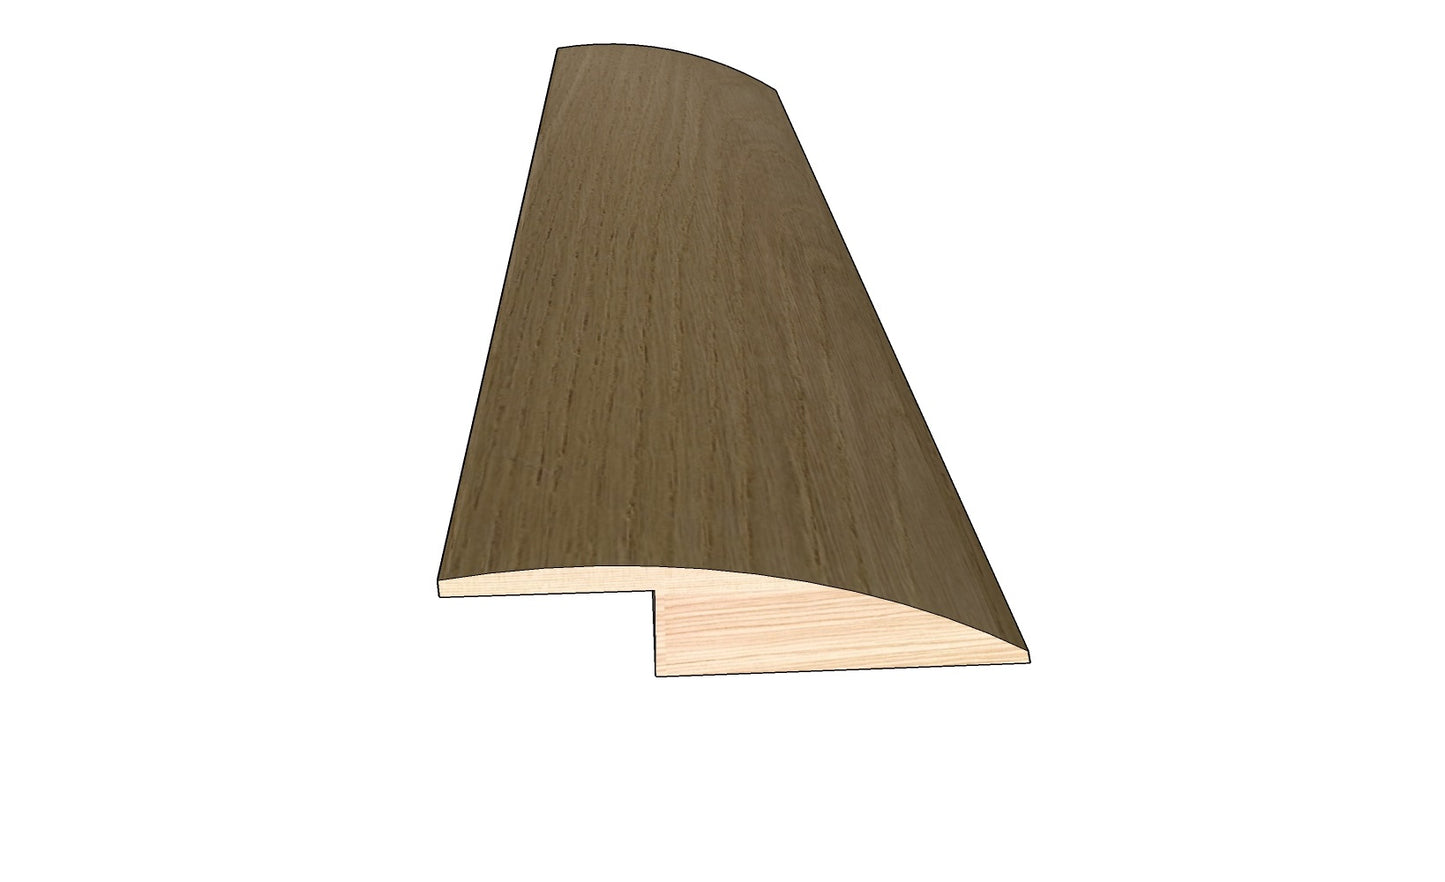 Manor 0.50 in. Thick x 1.50 in. Width x 78 in. Length Overlap Reducer Hardwood Molding